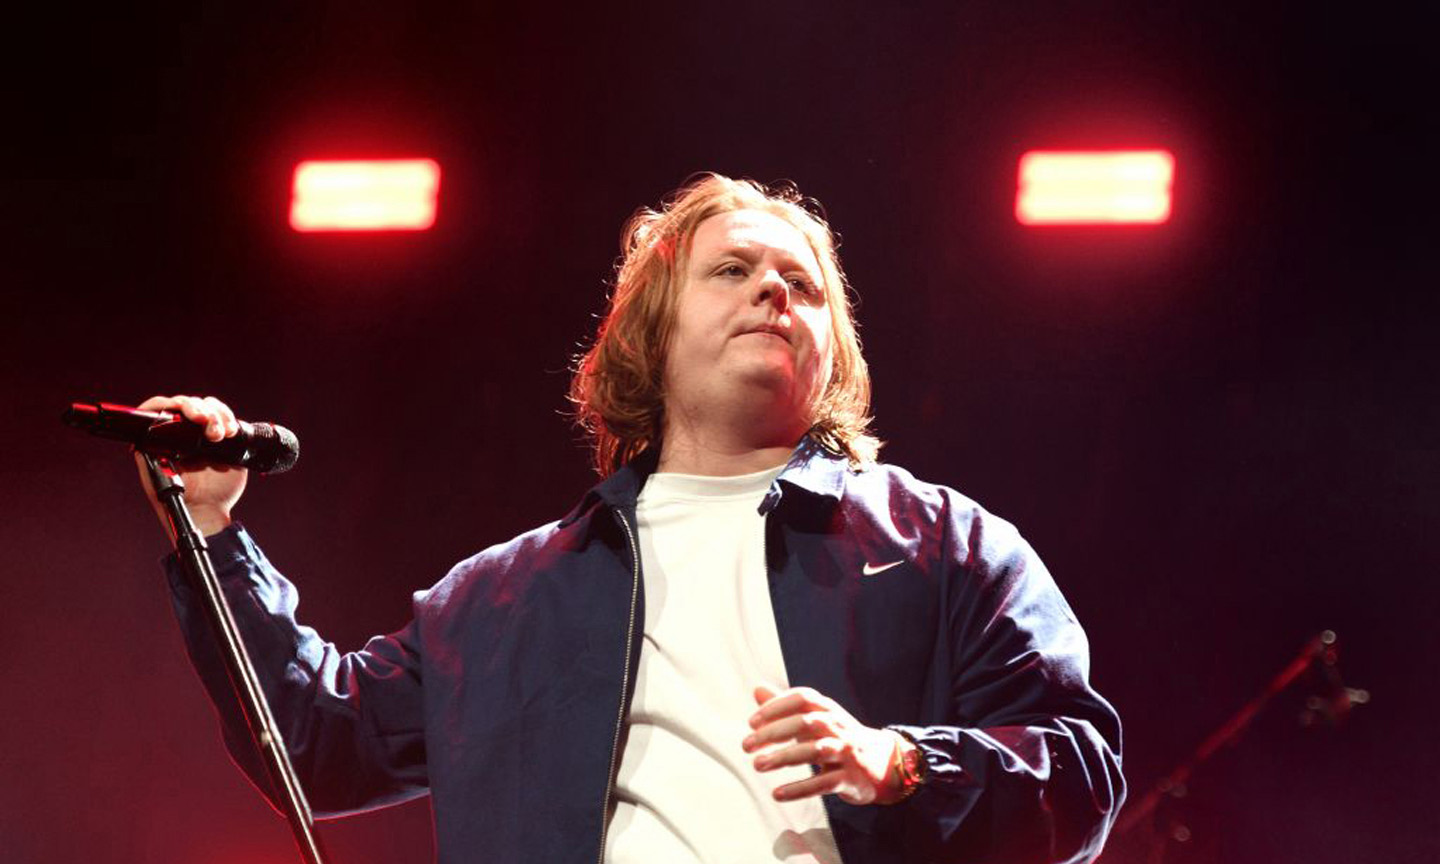 Lewis Capaldi - Divinely Uninspired To A Hellishextent (Deluxe